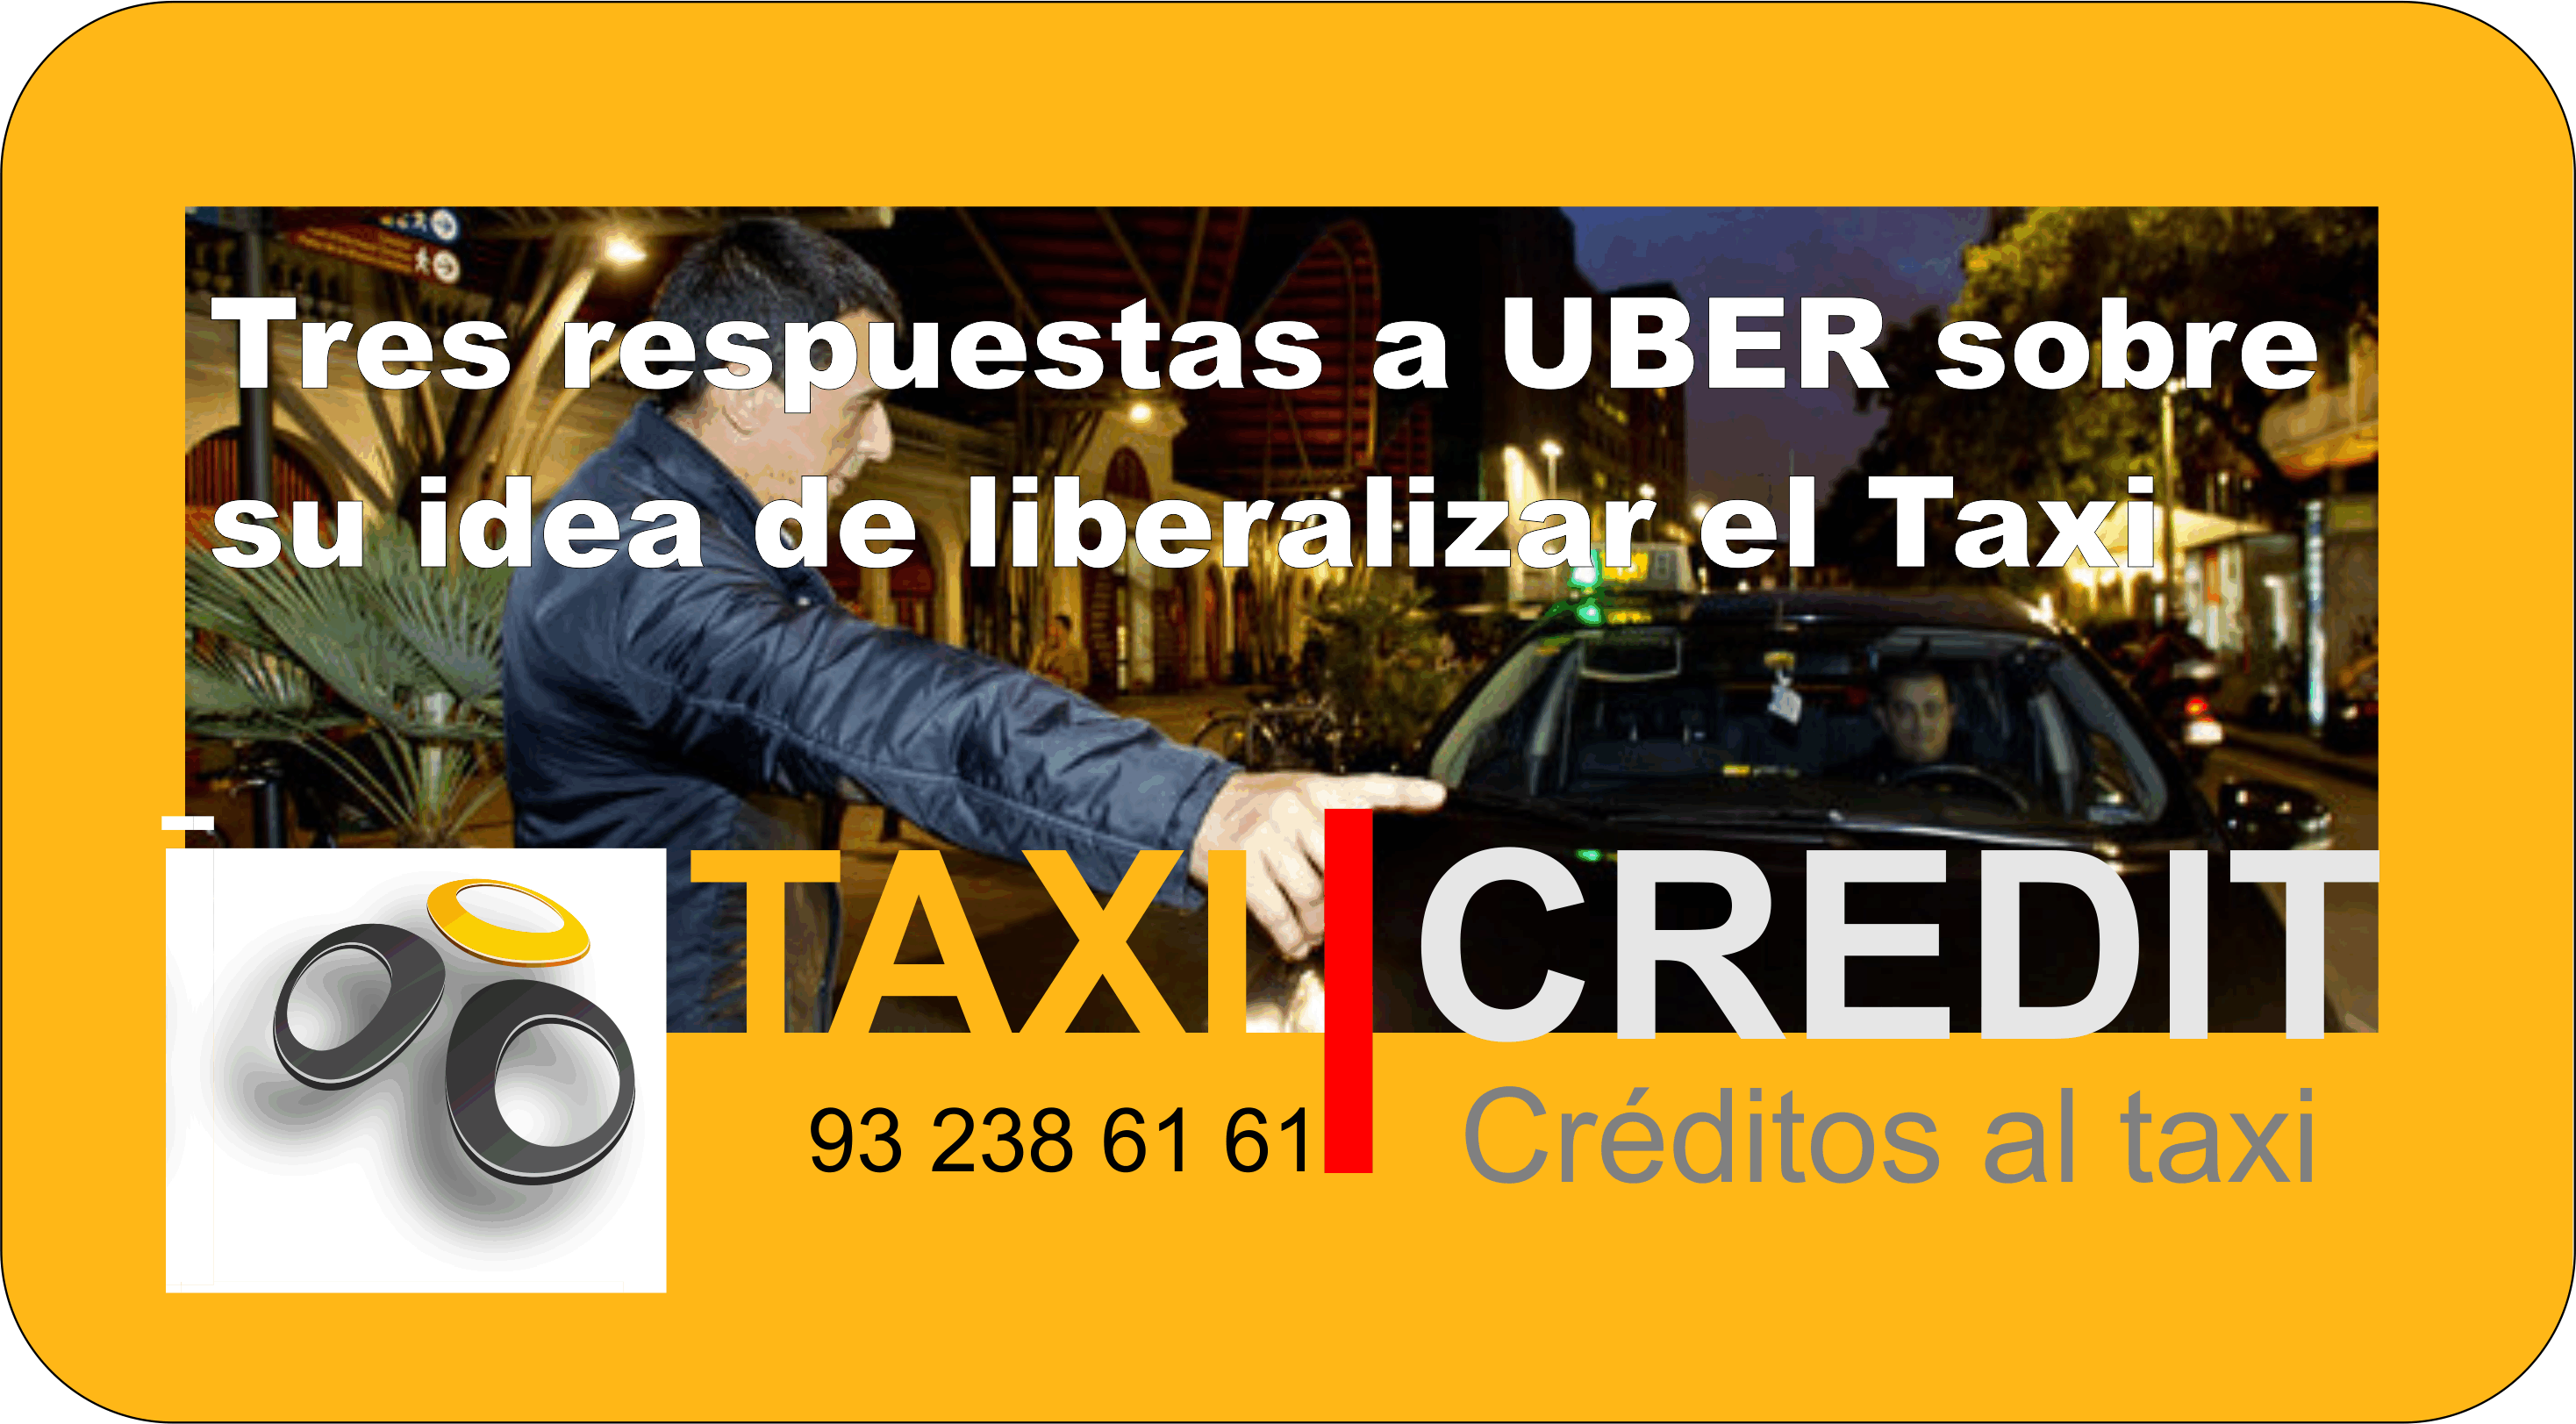 Taxicredit002